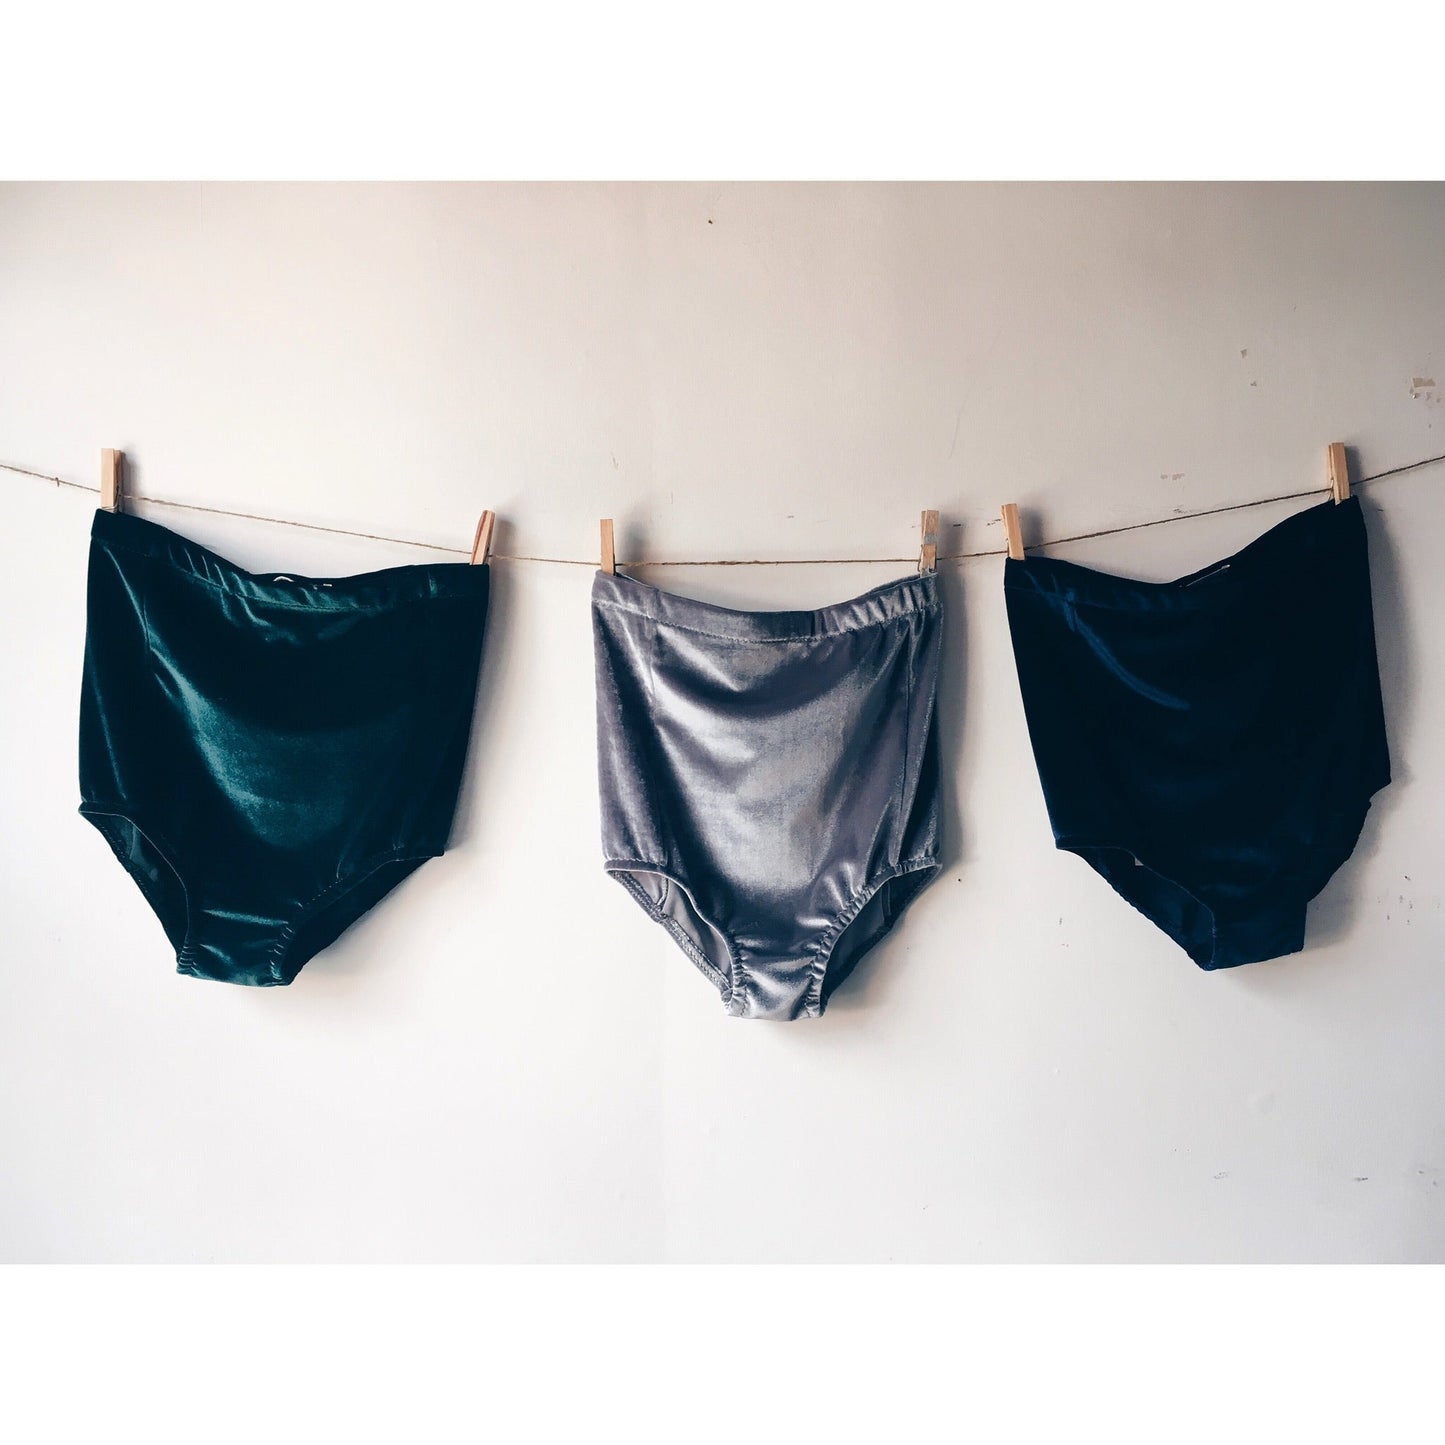 3 pairs of Velvet shorts pegged to a line against a white wall